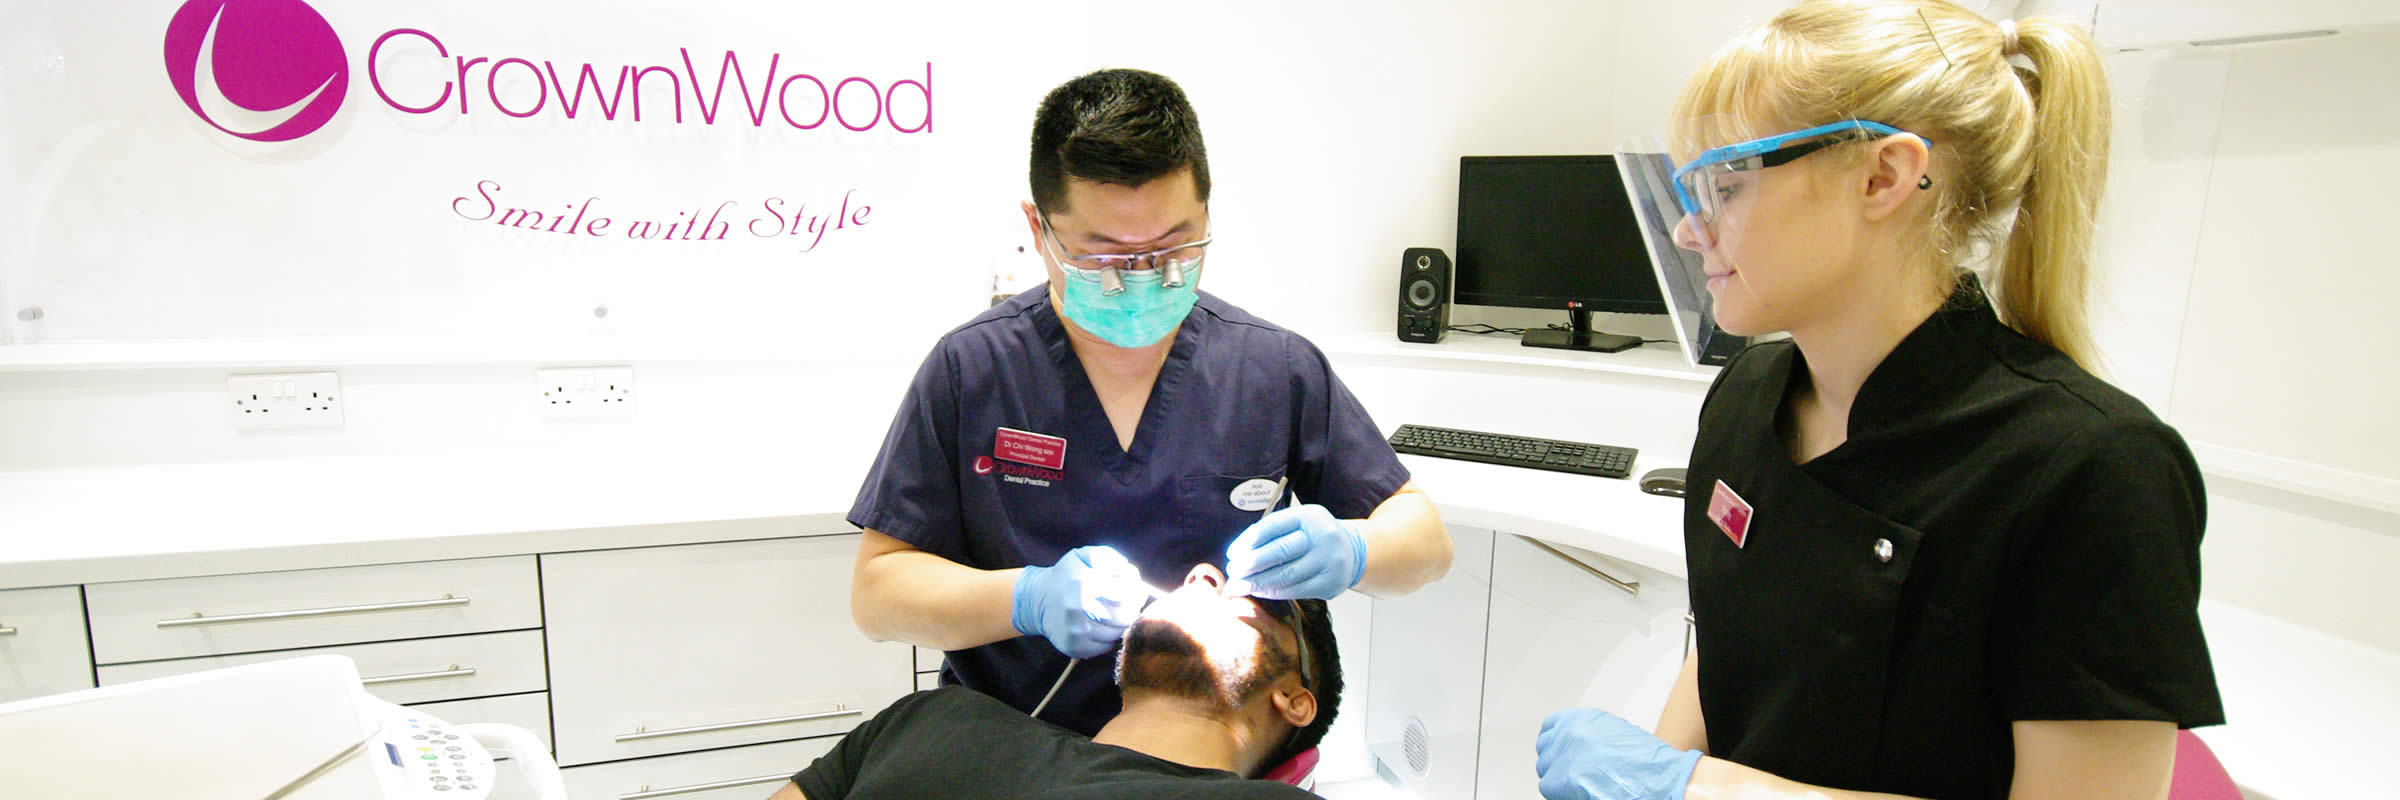 New Patients Exam just £99 at CrownWood Dental Practice in Bracknell